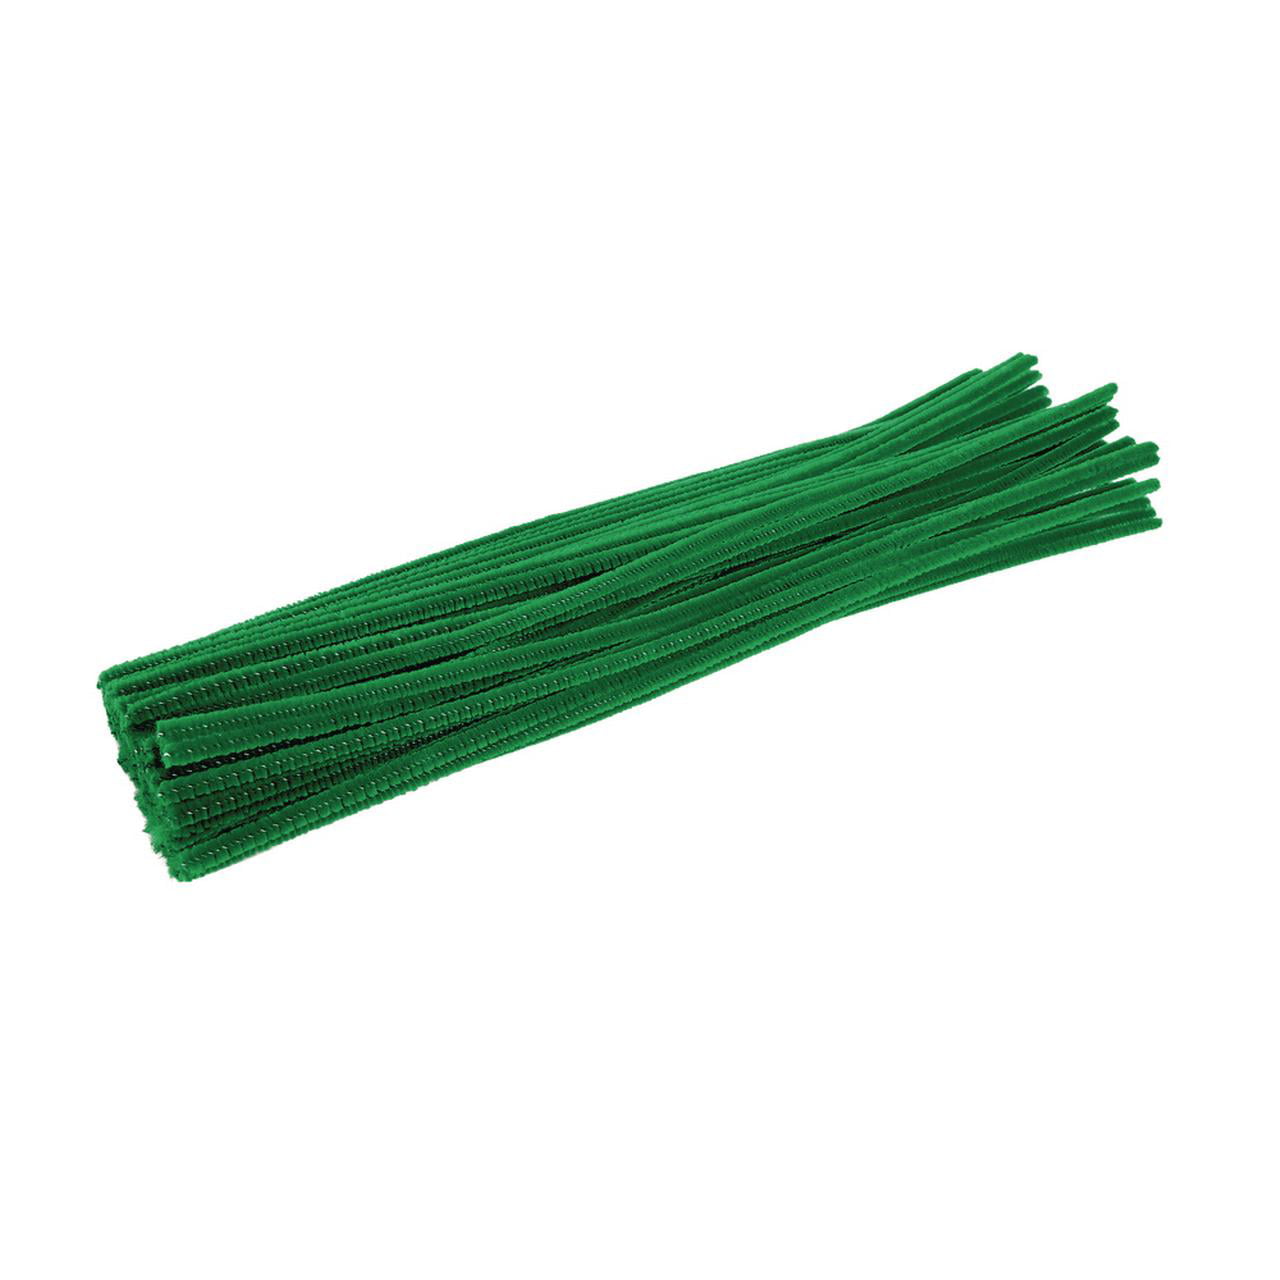 100 Pieces Pipe Cleaners Chenille Stem Chenille Stems Pipe Cleaners Solid Color Pipe Cleaners Set for Pipe Cleaners DIY Arts Crafts Decorations Green 